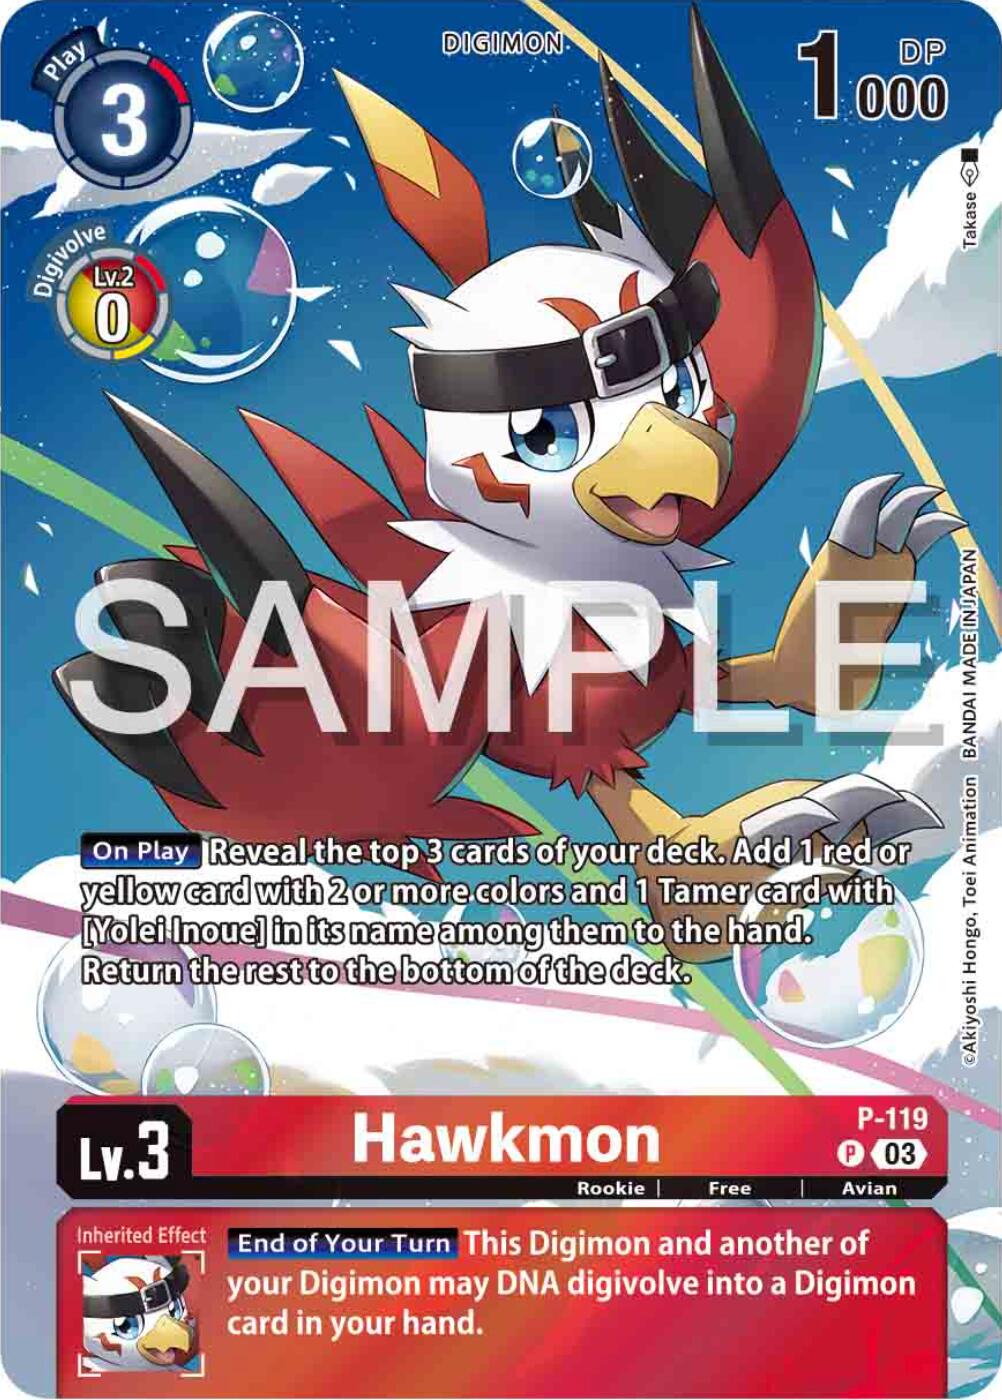 Hawkmon [P-119] (Digimon Adventure 02: The Beginning Set) [Promotional Cards] | Anubis Games and Hobby